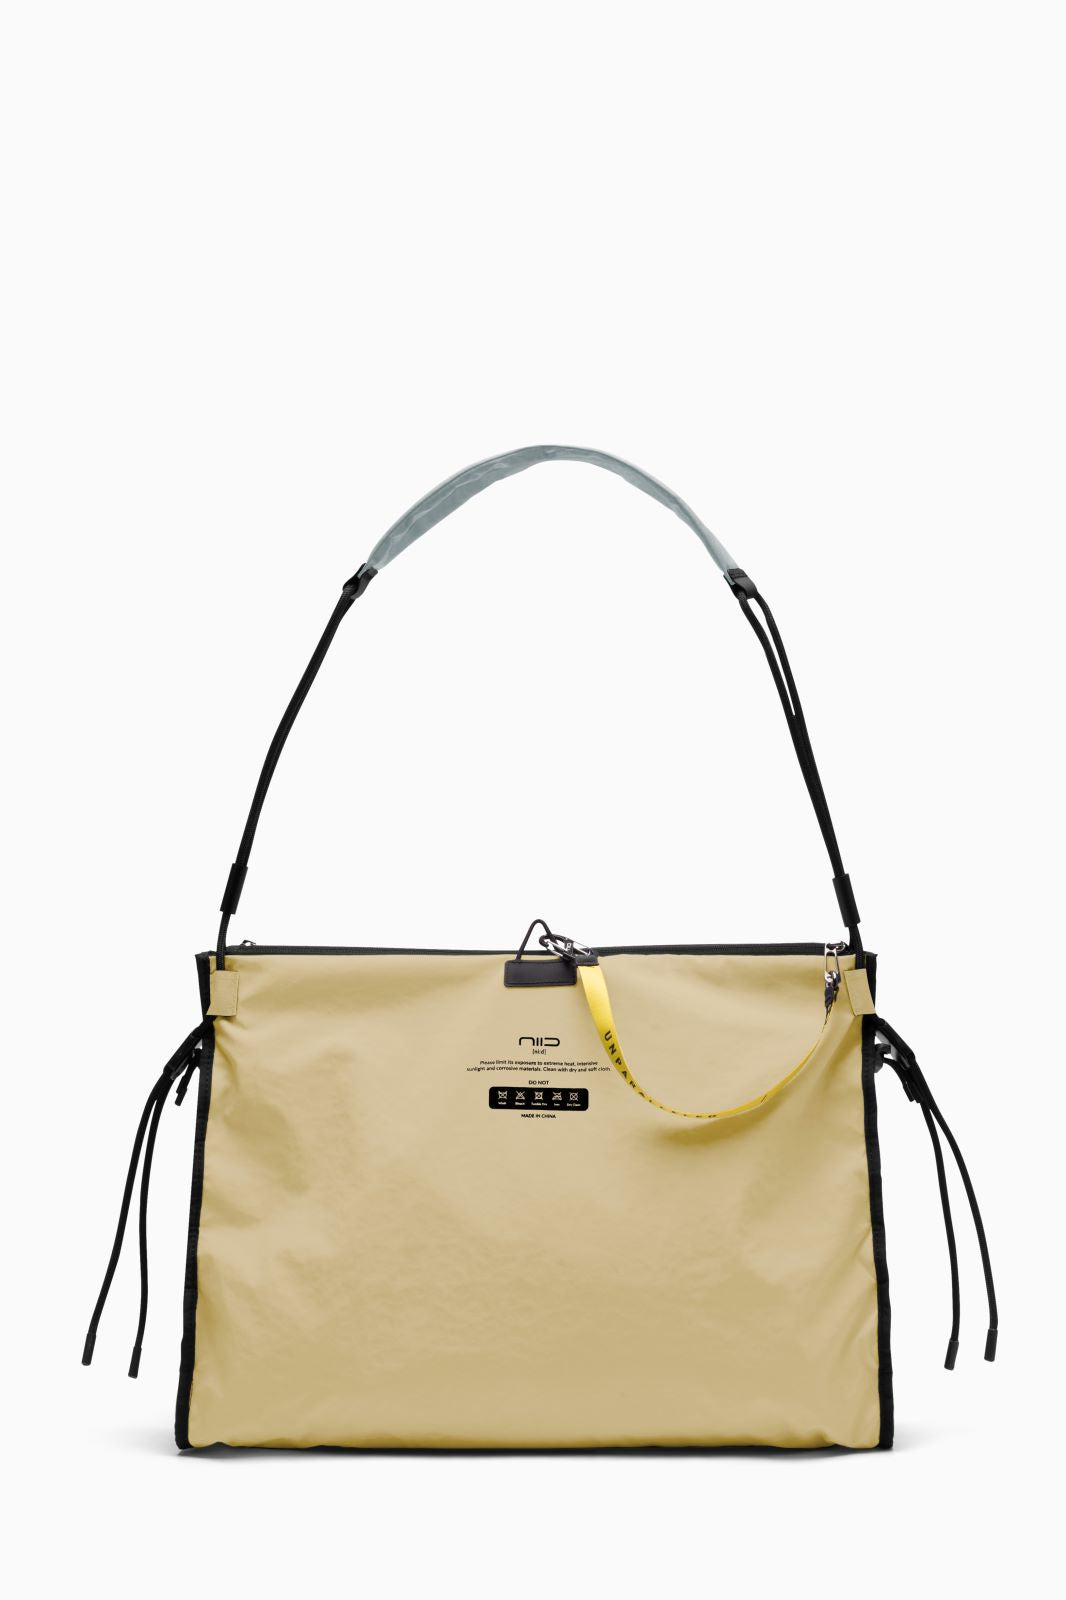 NIID S7 Tote / Gray/Buttercup